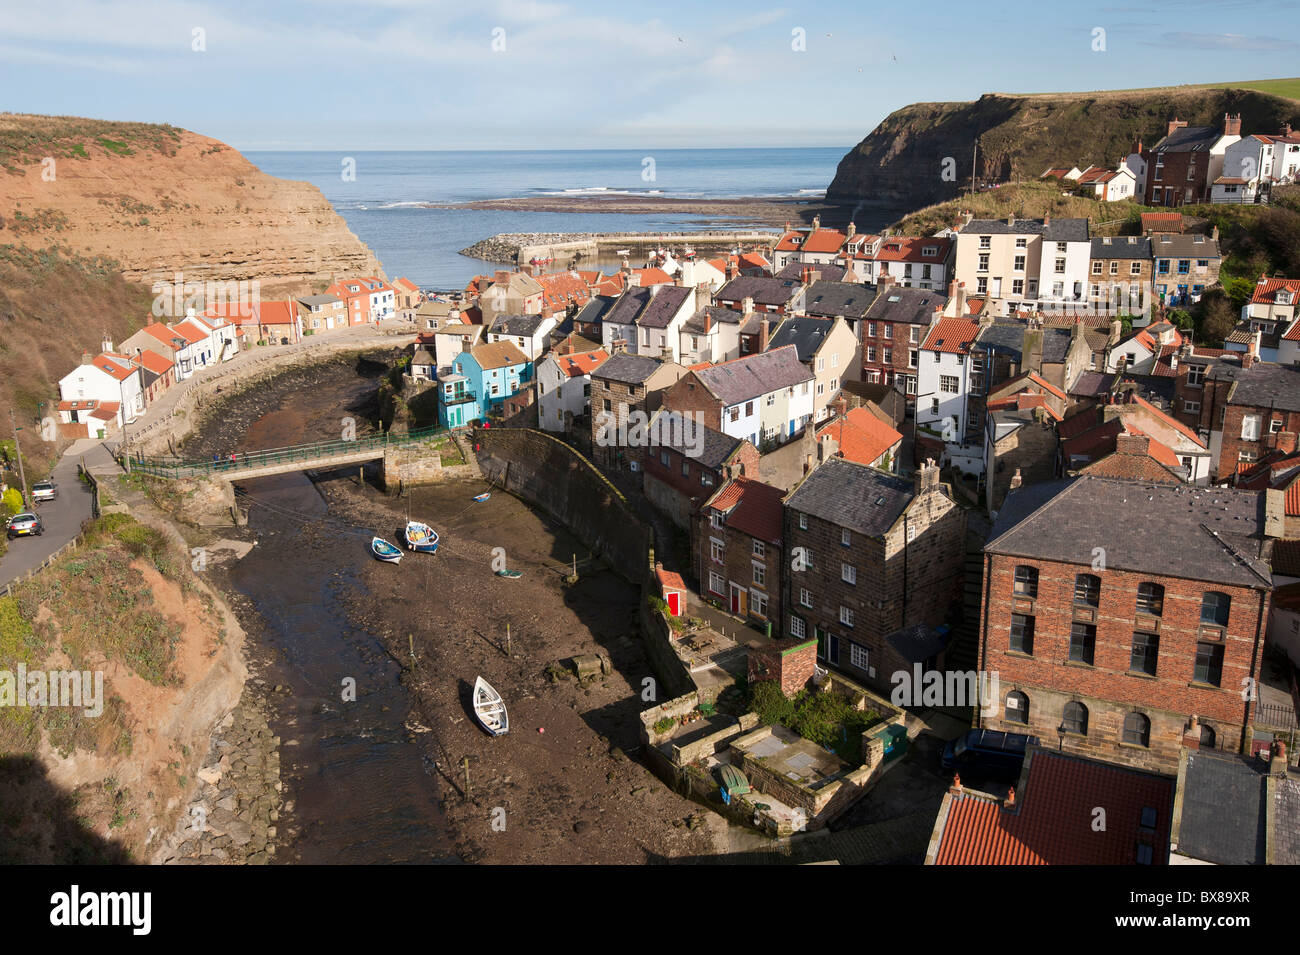 Staithes, on the East coast of Yorkshire, England, is a great place to visit on a sunny day. The River Esk flows through the town to the sea. Stock Photo